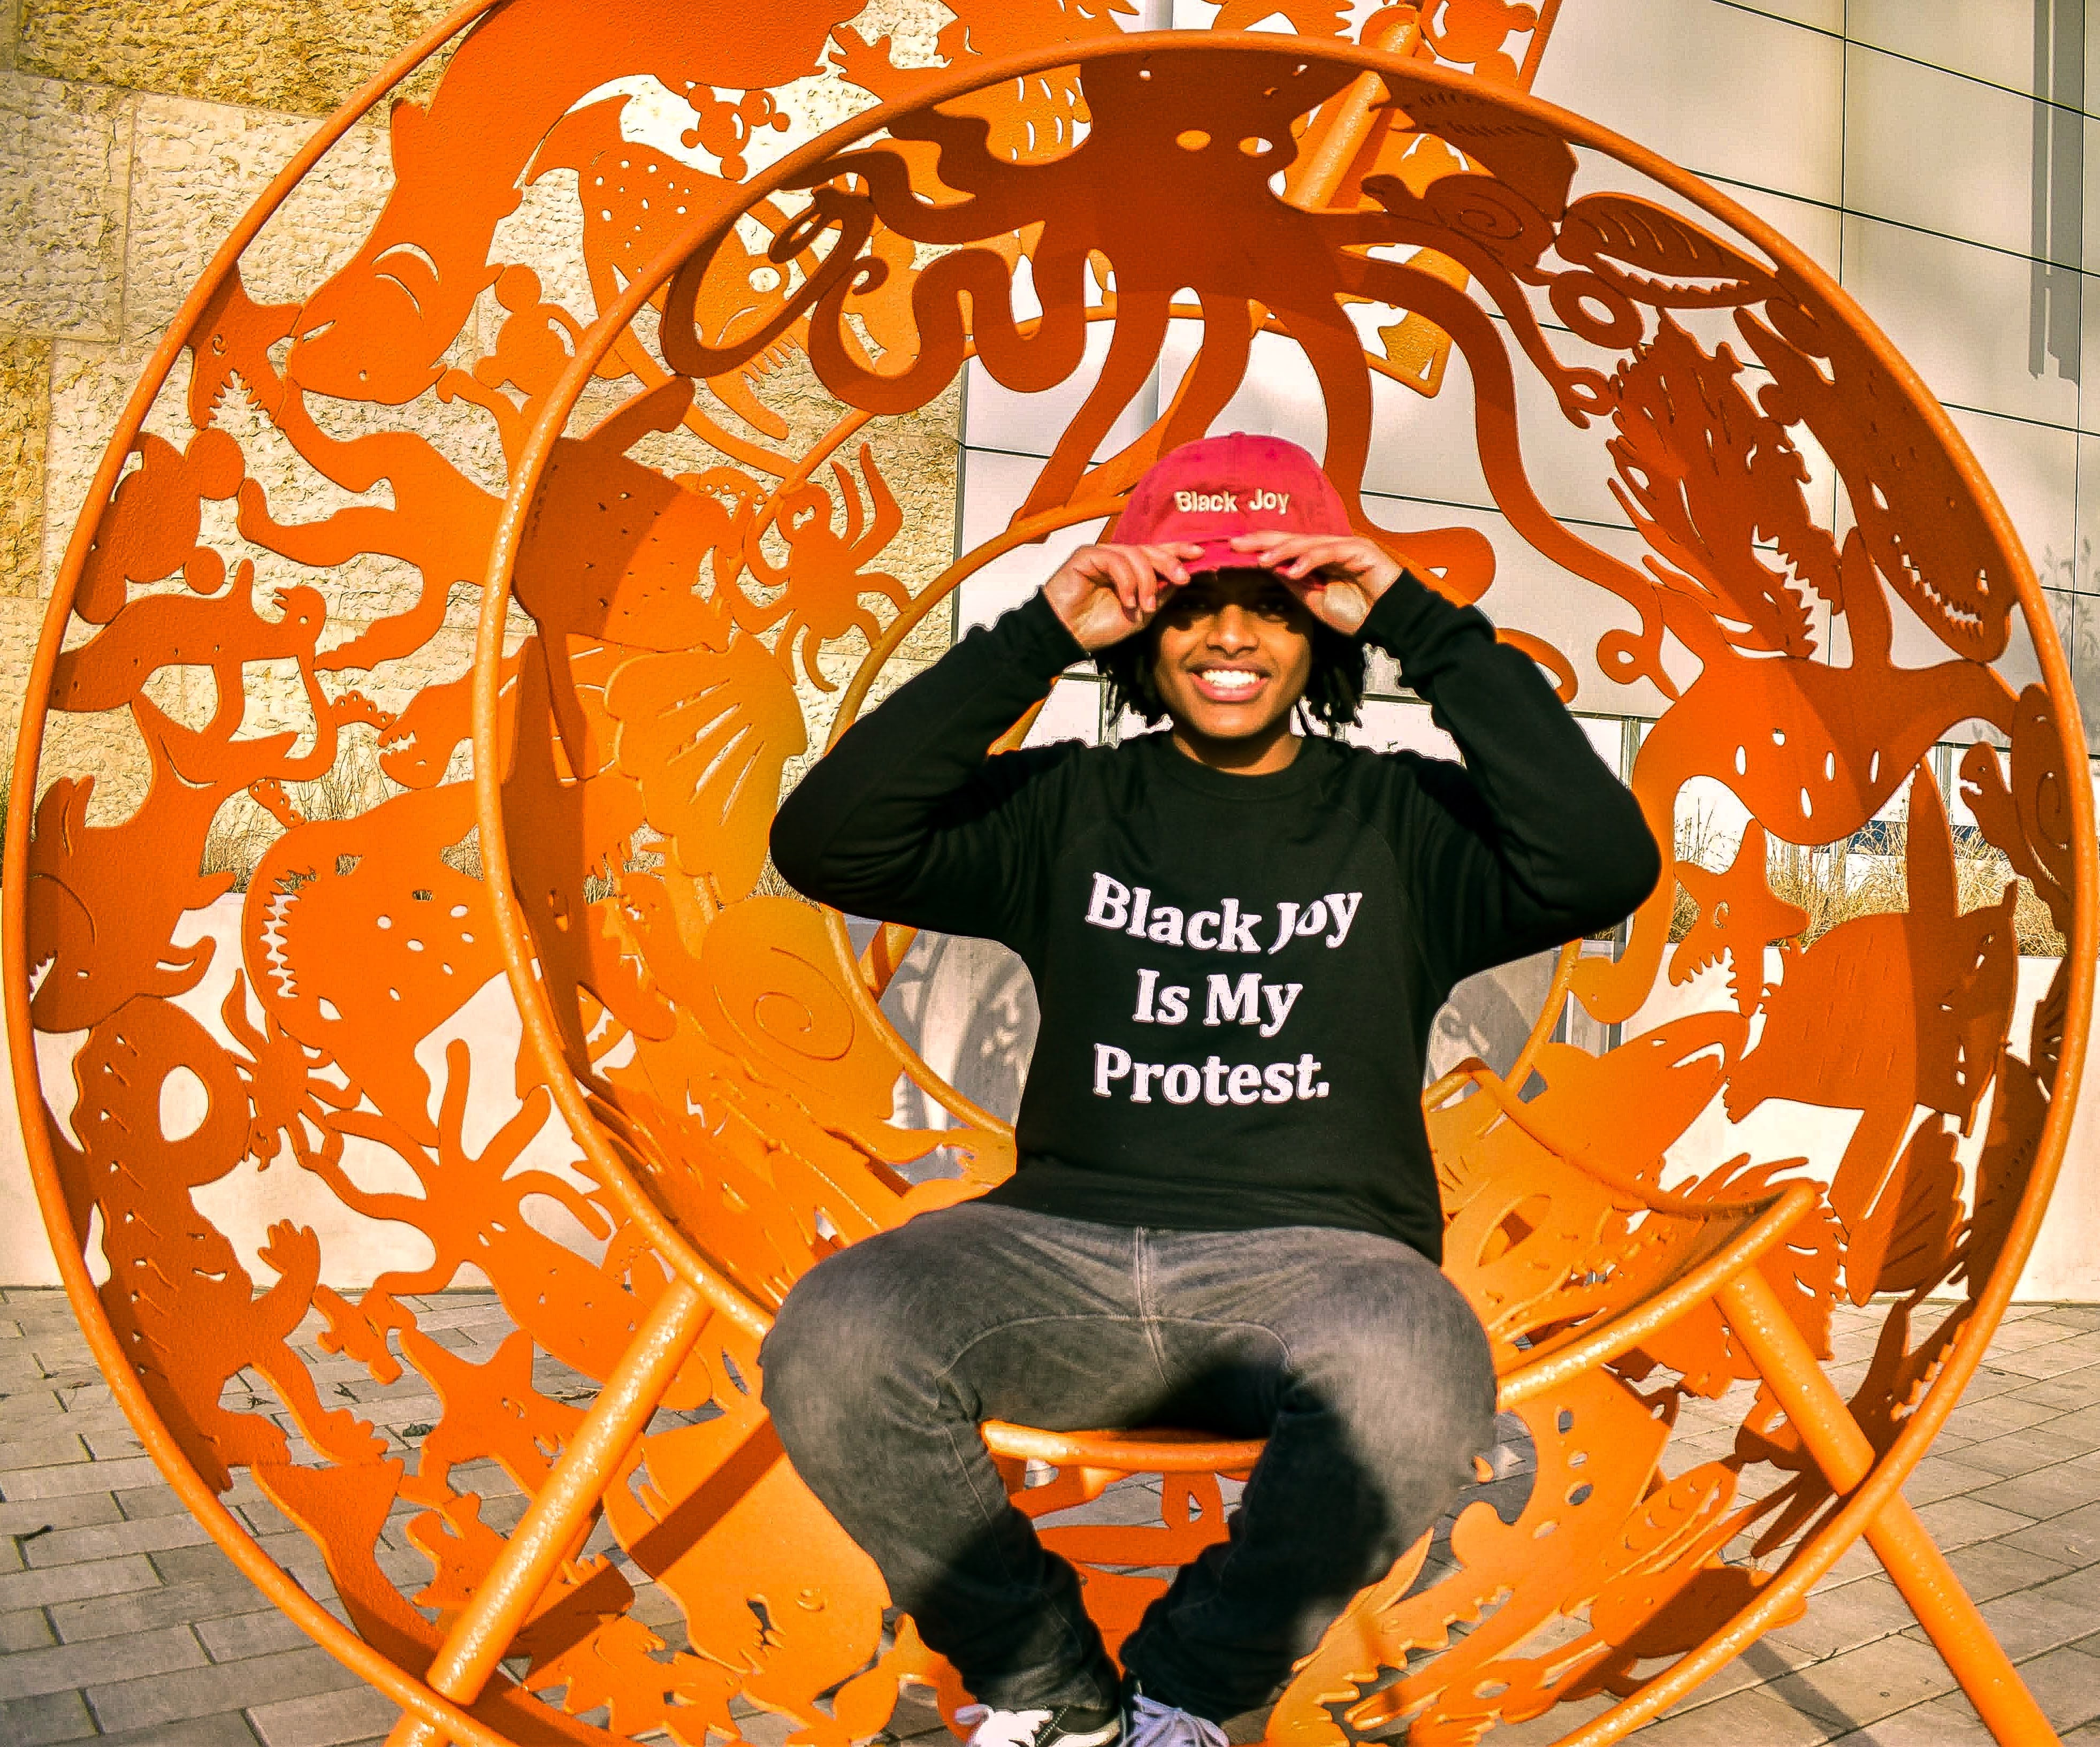 Young Black man wearing a "Black Joy Is My Protest" sweatshirt and a pink "Black Joy" hat.